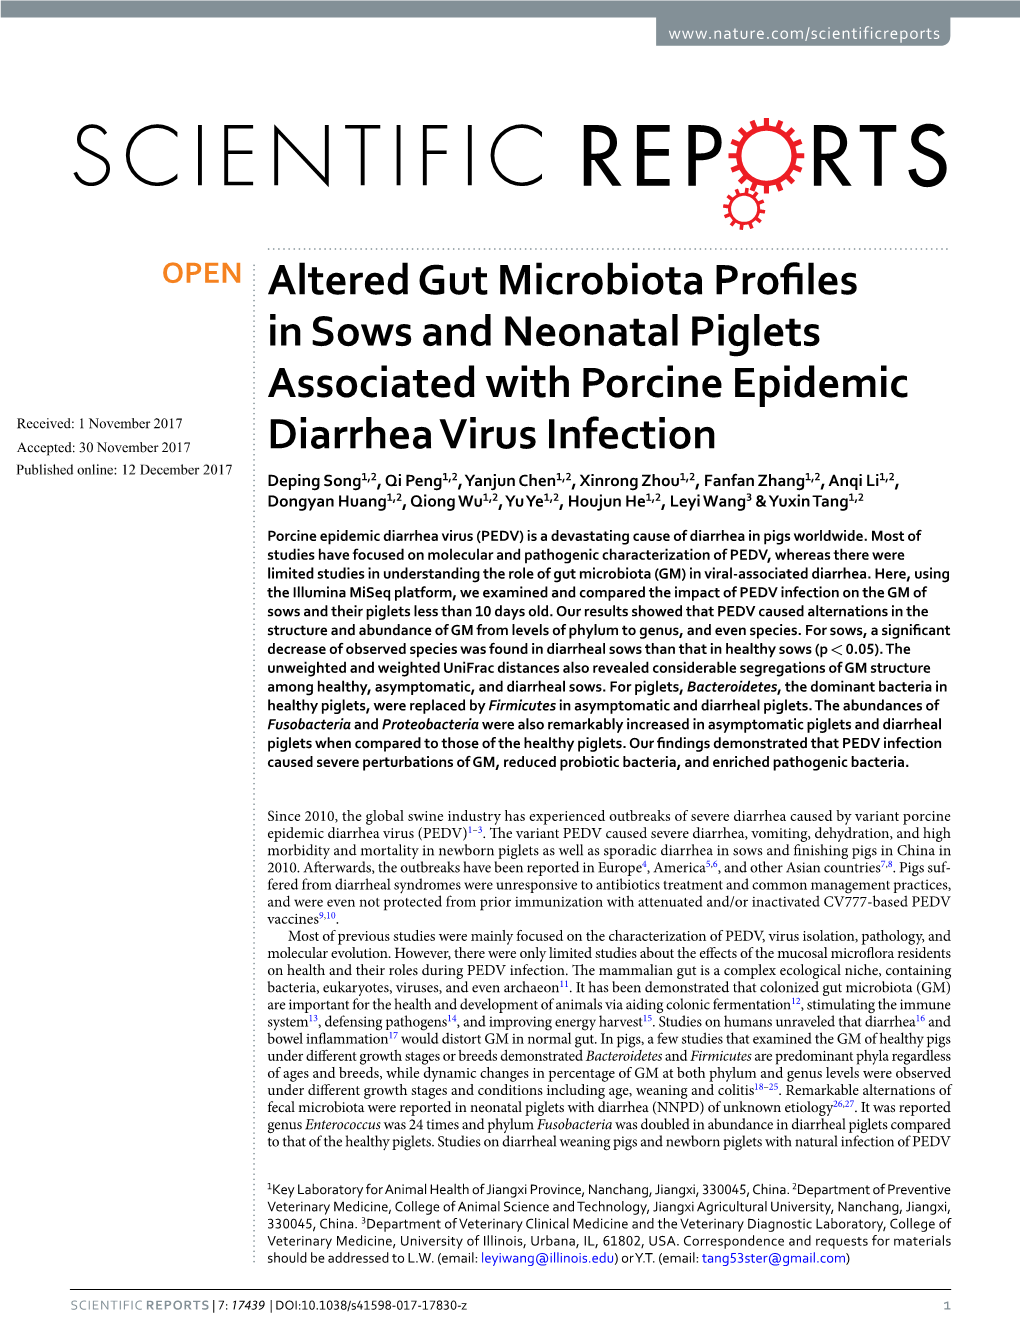 Altered Gut Microbiota Profiles in Sows and Neonatal Piglets Associated with Porcine Epidemic Diarrhea Virus Infection